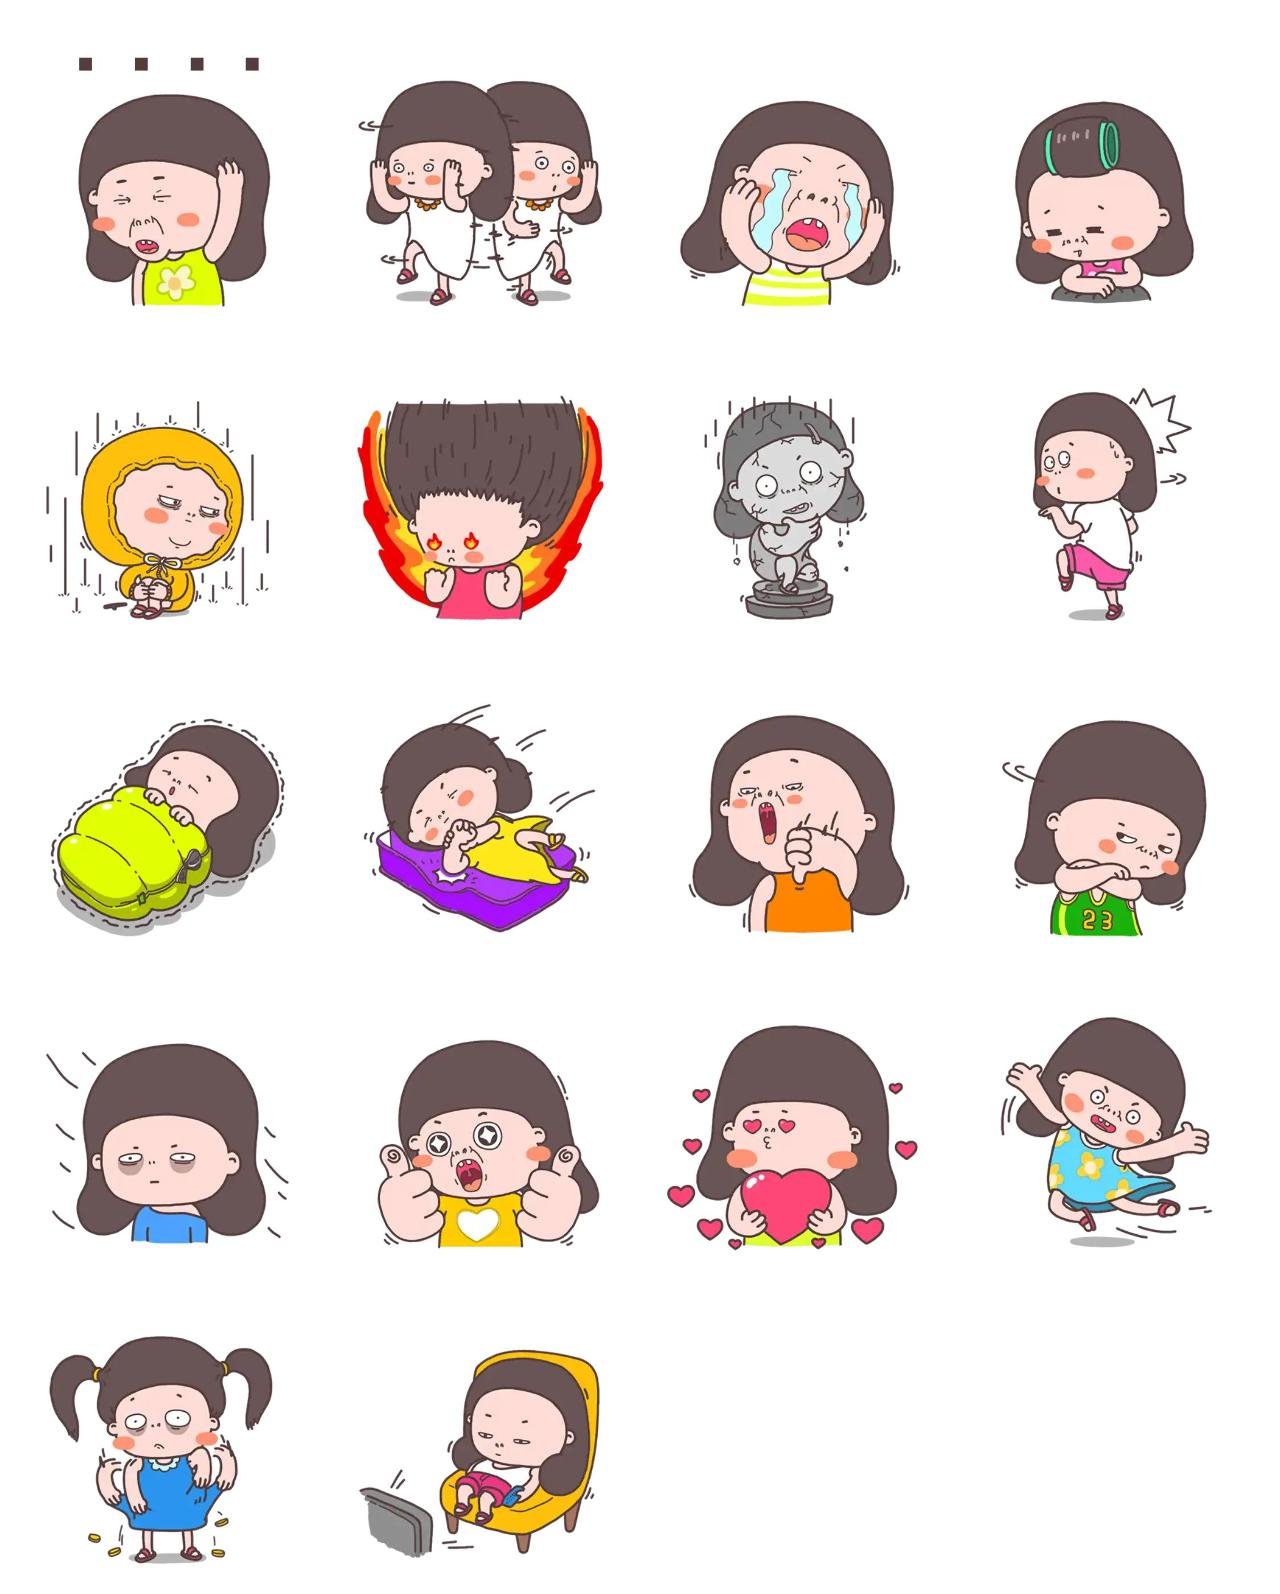 HEYRIN People,Etc. sticker pack for Whatsapp, Telegram, Signal, and others chatting and message apps